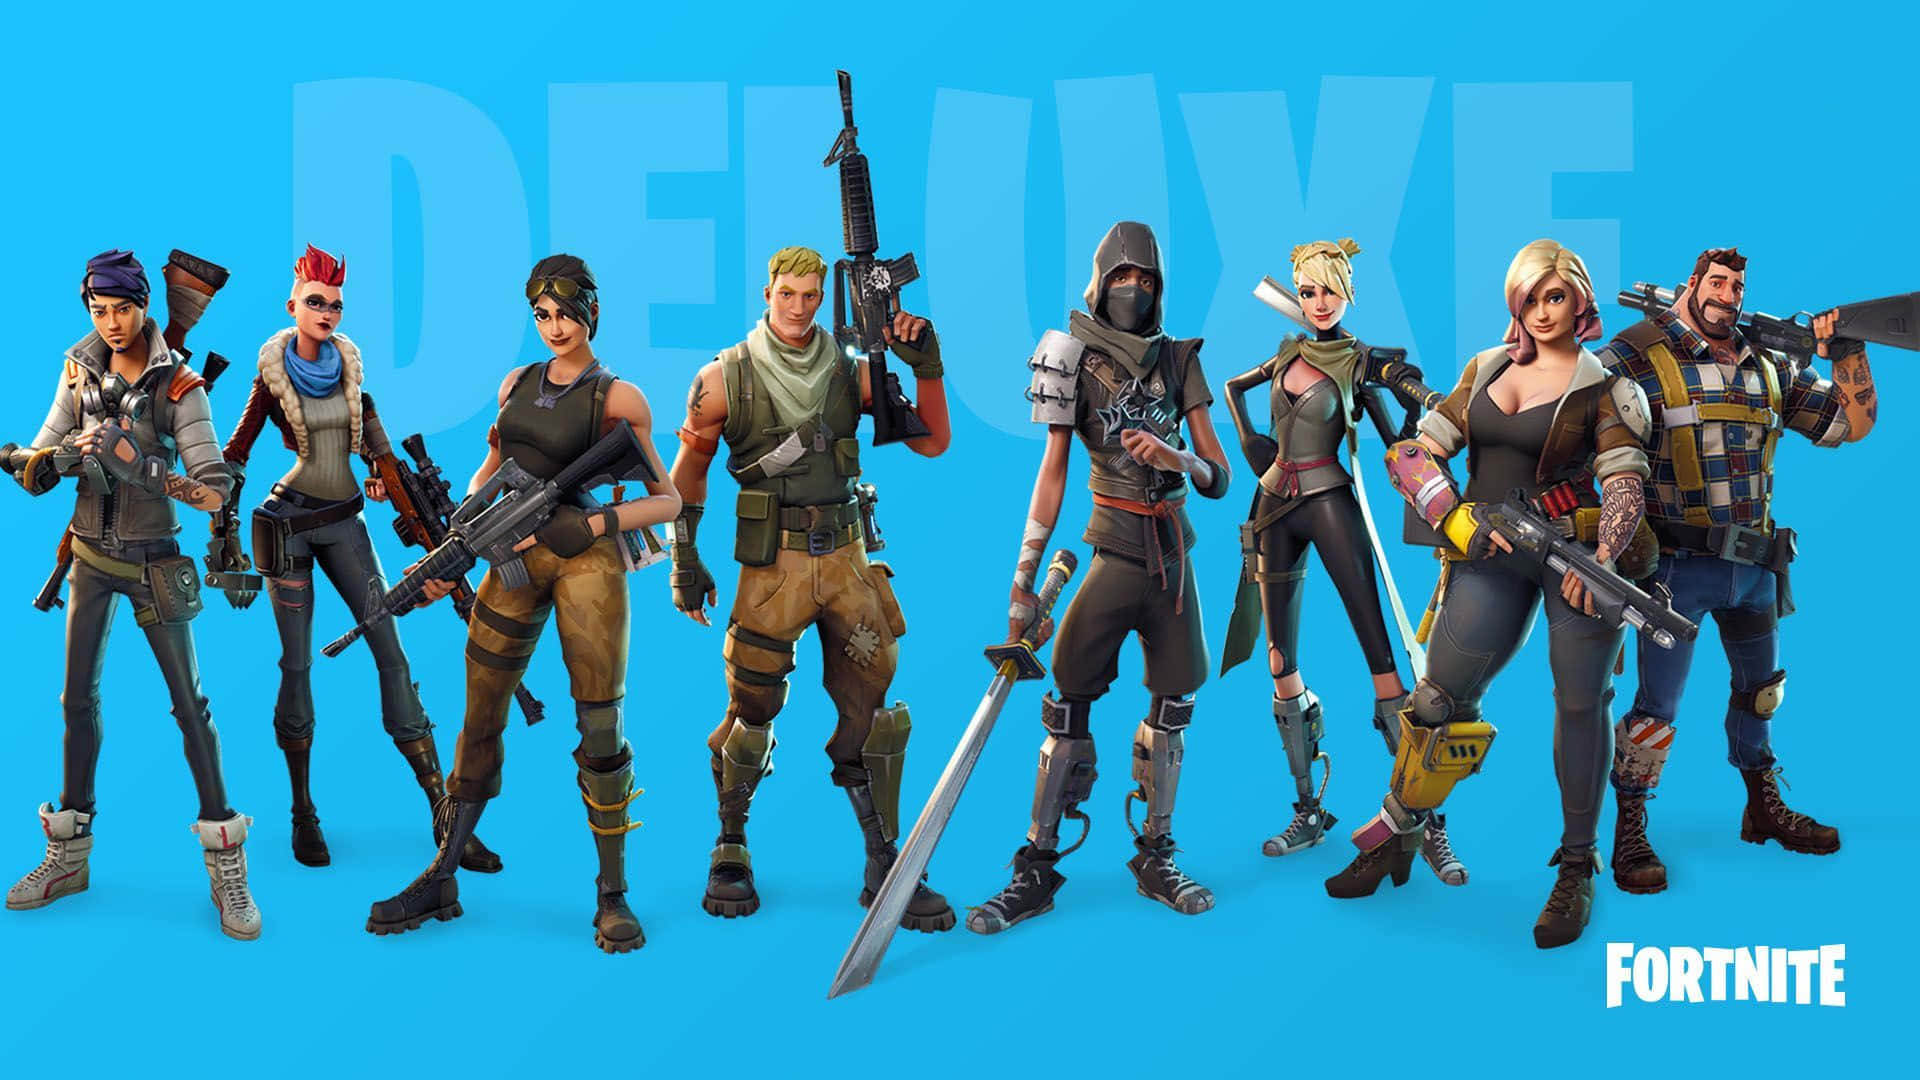 Player Ready for Action in Fortnite Game on Laptop Wallpaper